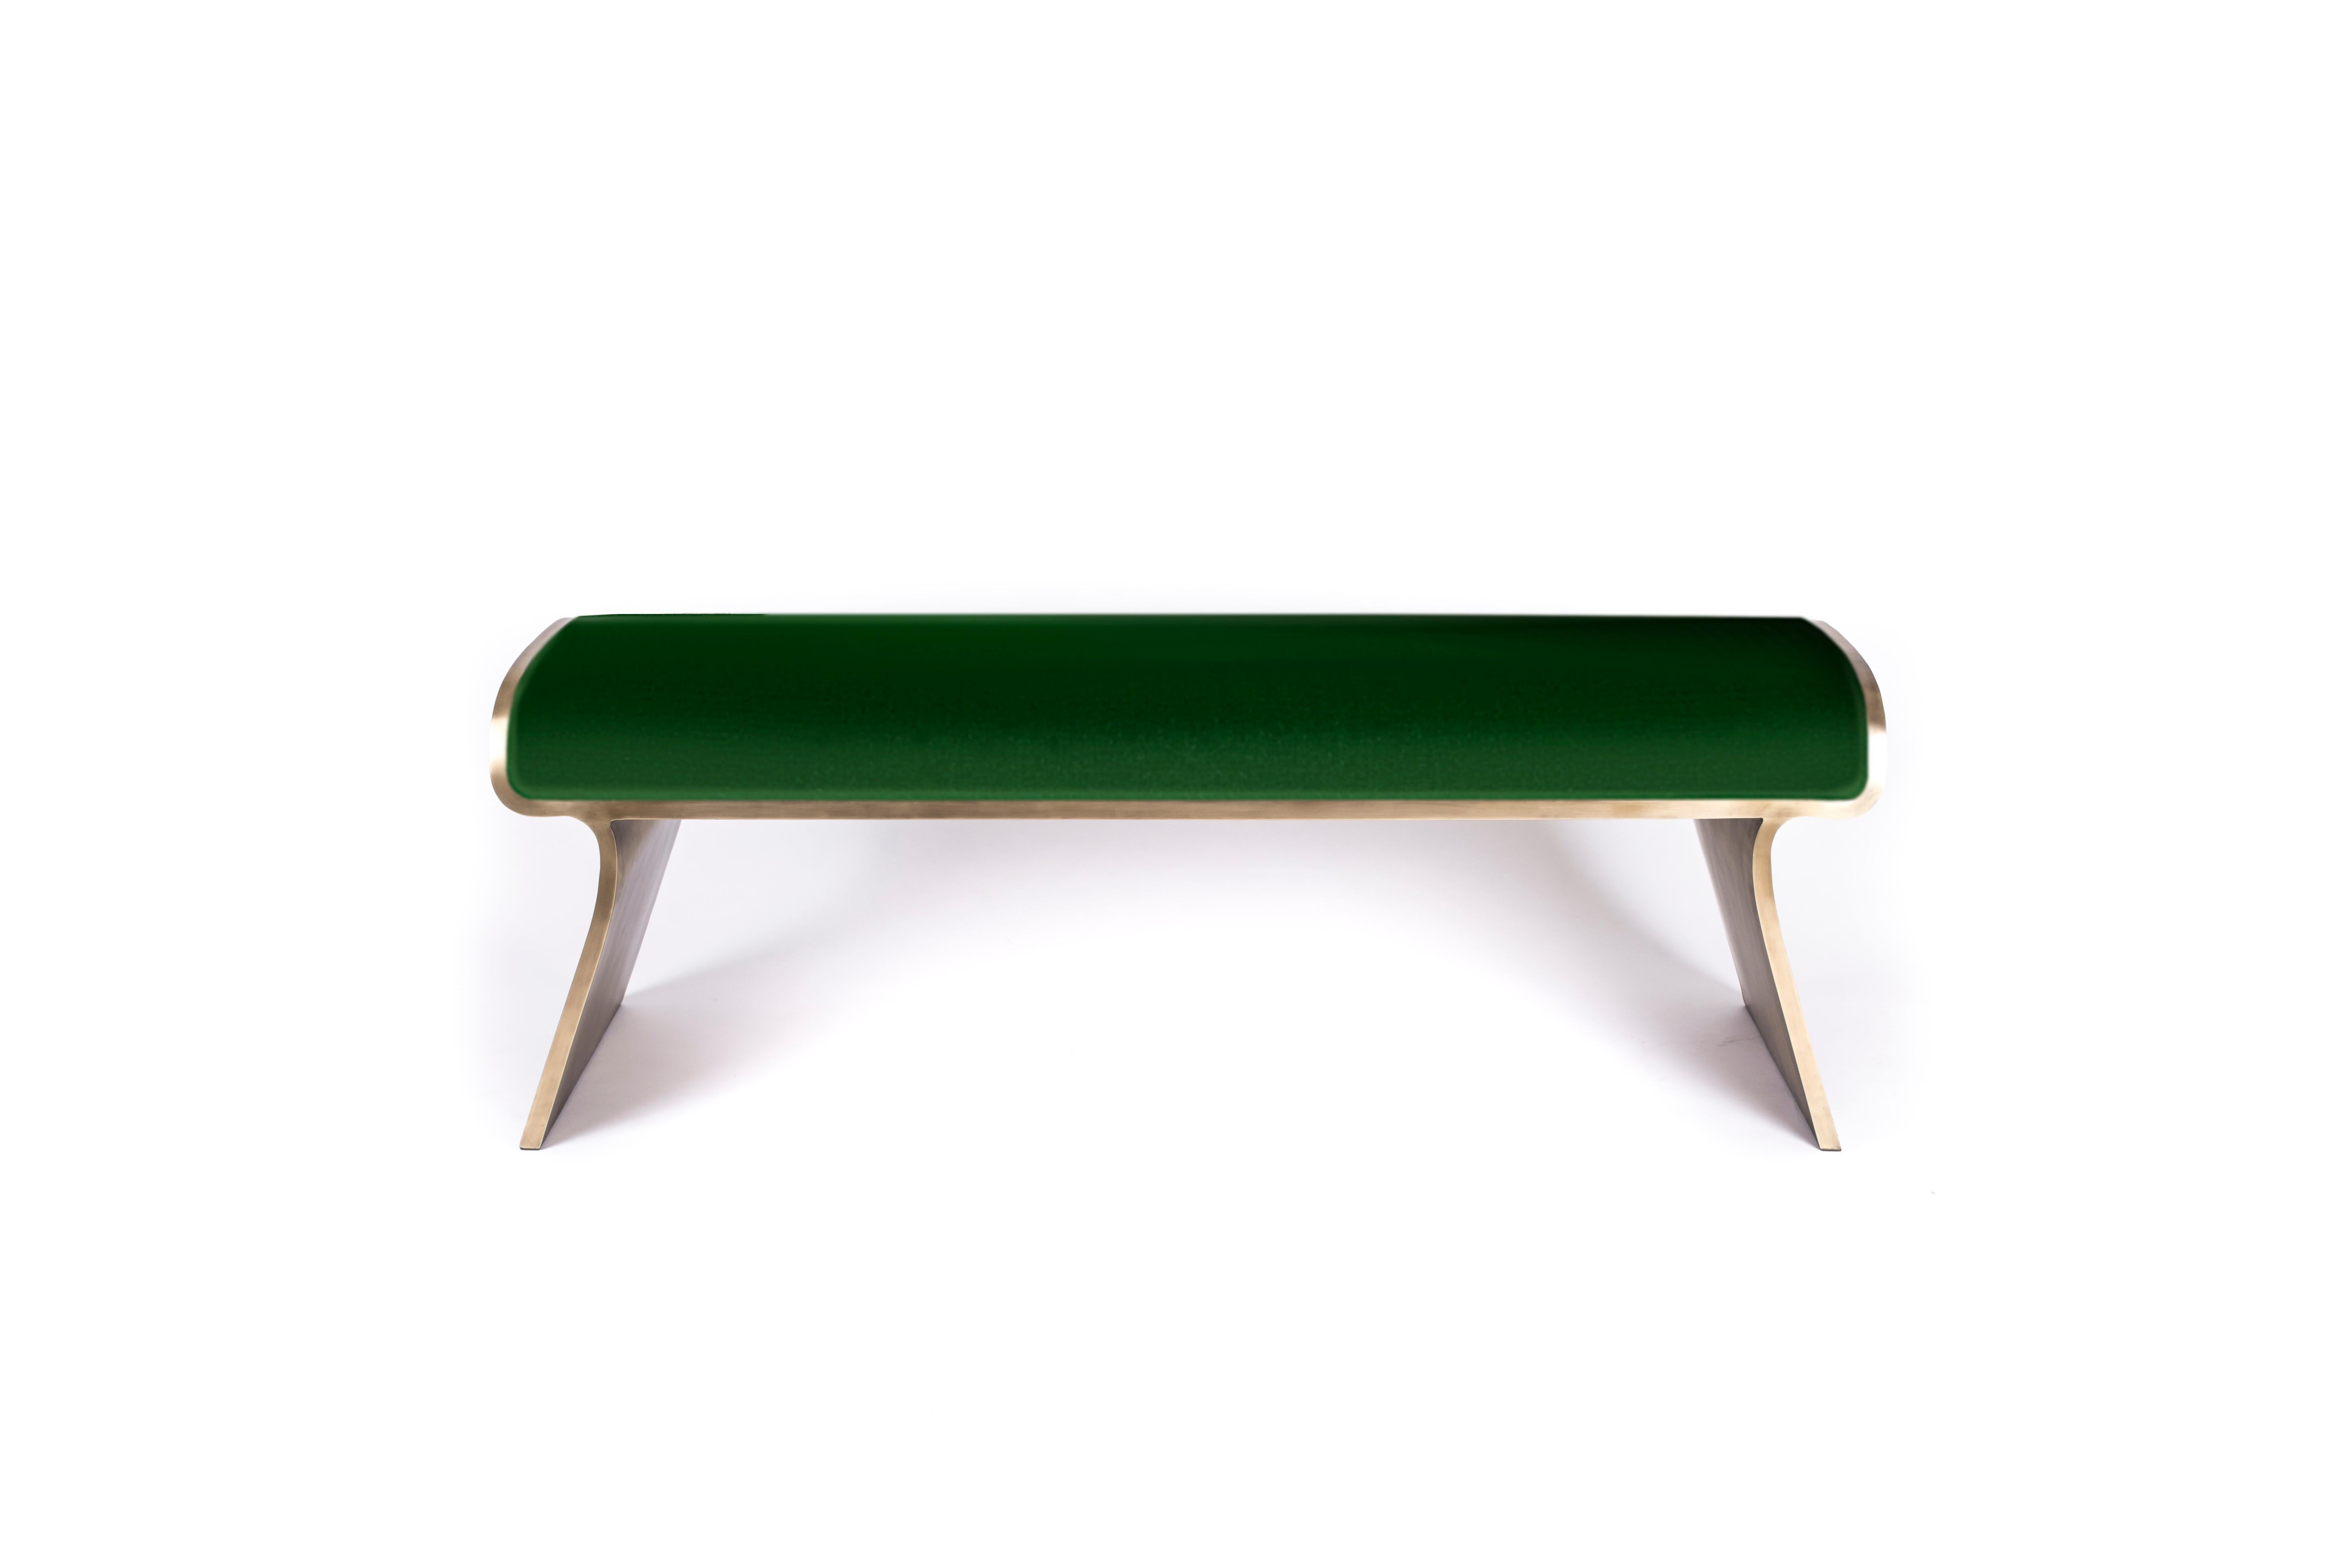 The Dandy day bench is the ultimate luxury seating. The seating area is upholstered in a lustrous green velvet and the frame and sides of the bench are completely inlaid in bronze-patina brass. A version upholstered in horsehair, an inlaid seat